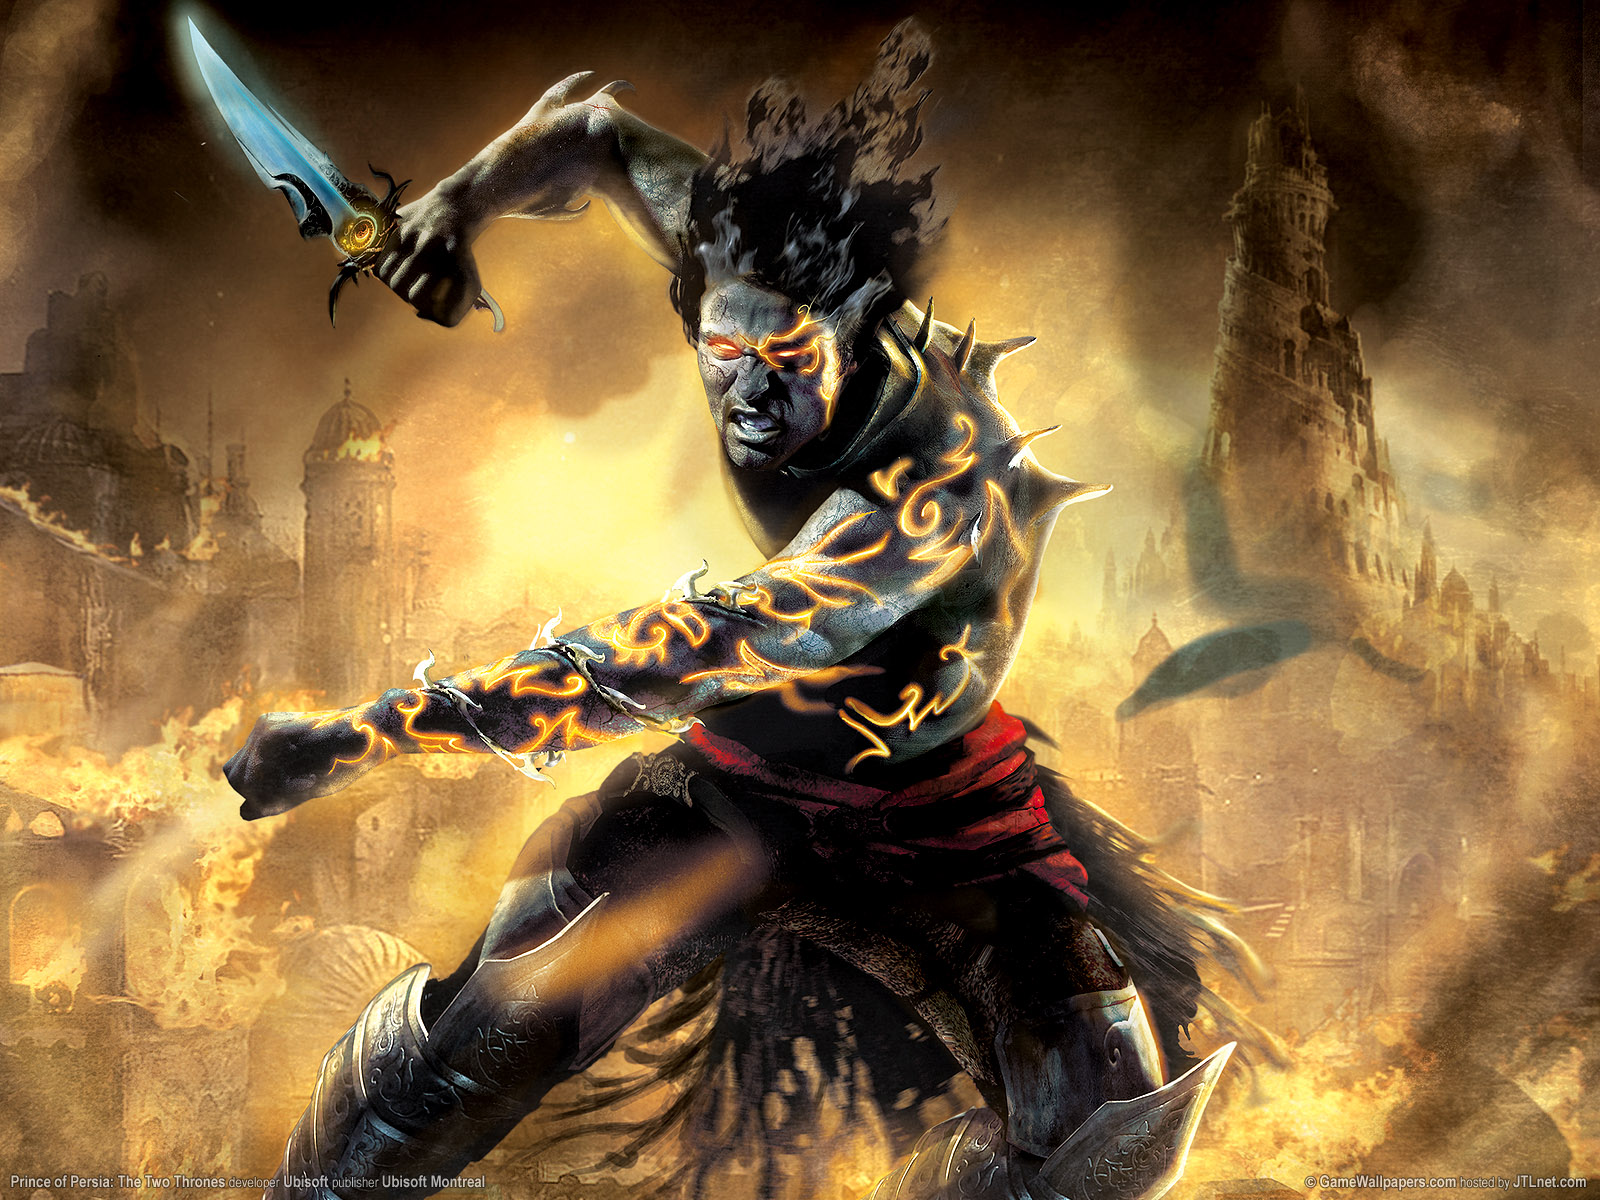 animated gaming wallpaper,action adventure game,cg artwork,demon,fictional character,warlord